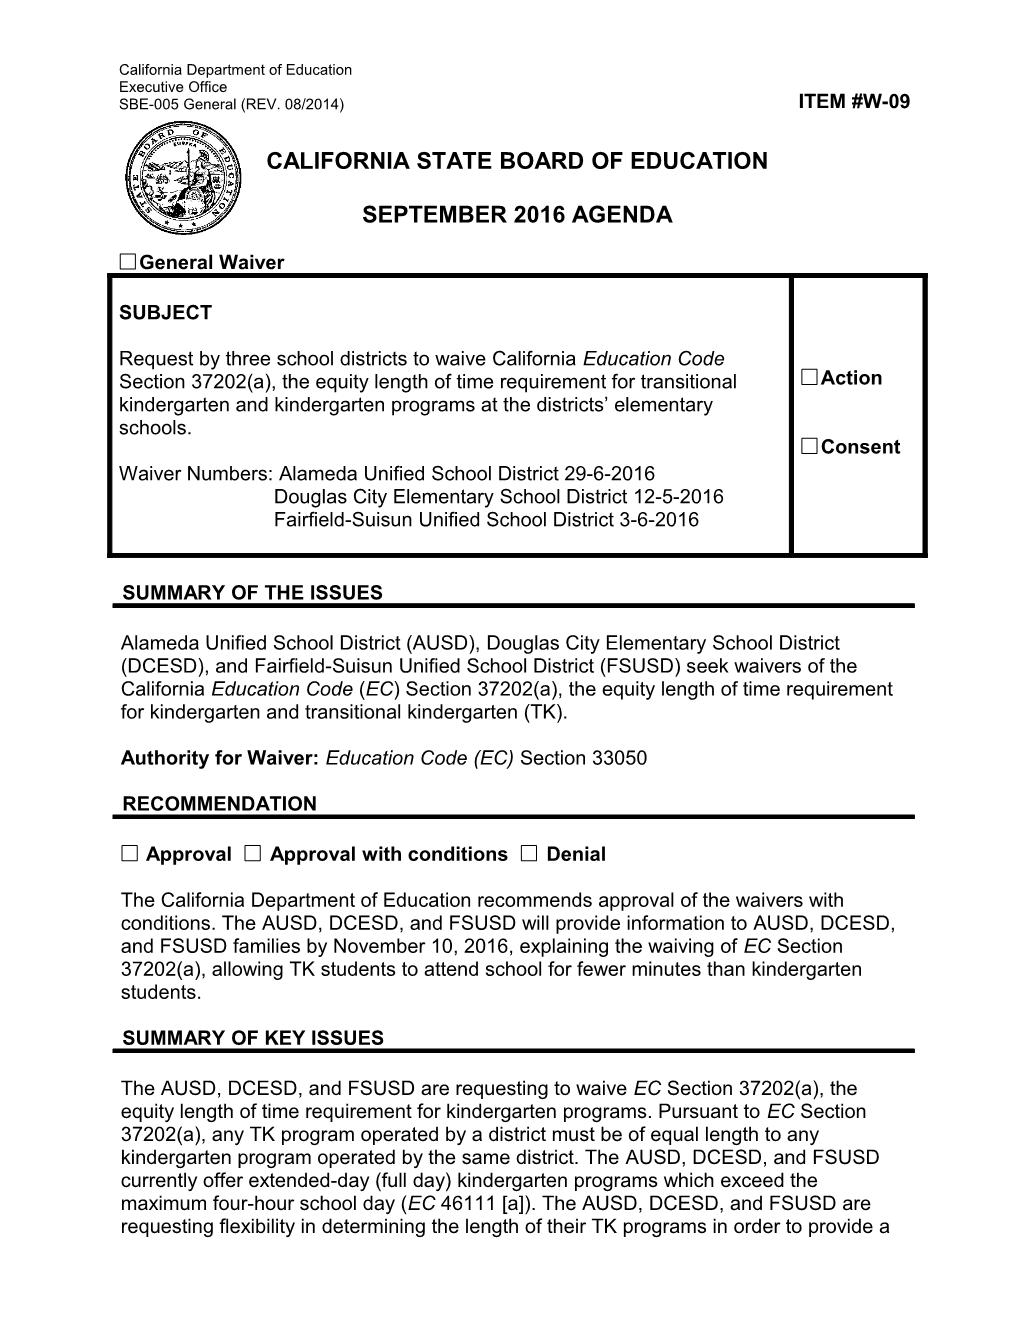 September 2016 Waiver Item W-09 - Meeting Agendas (CA State Board of Education)